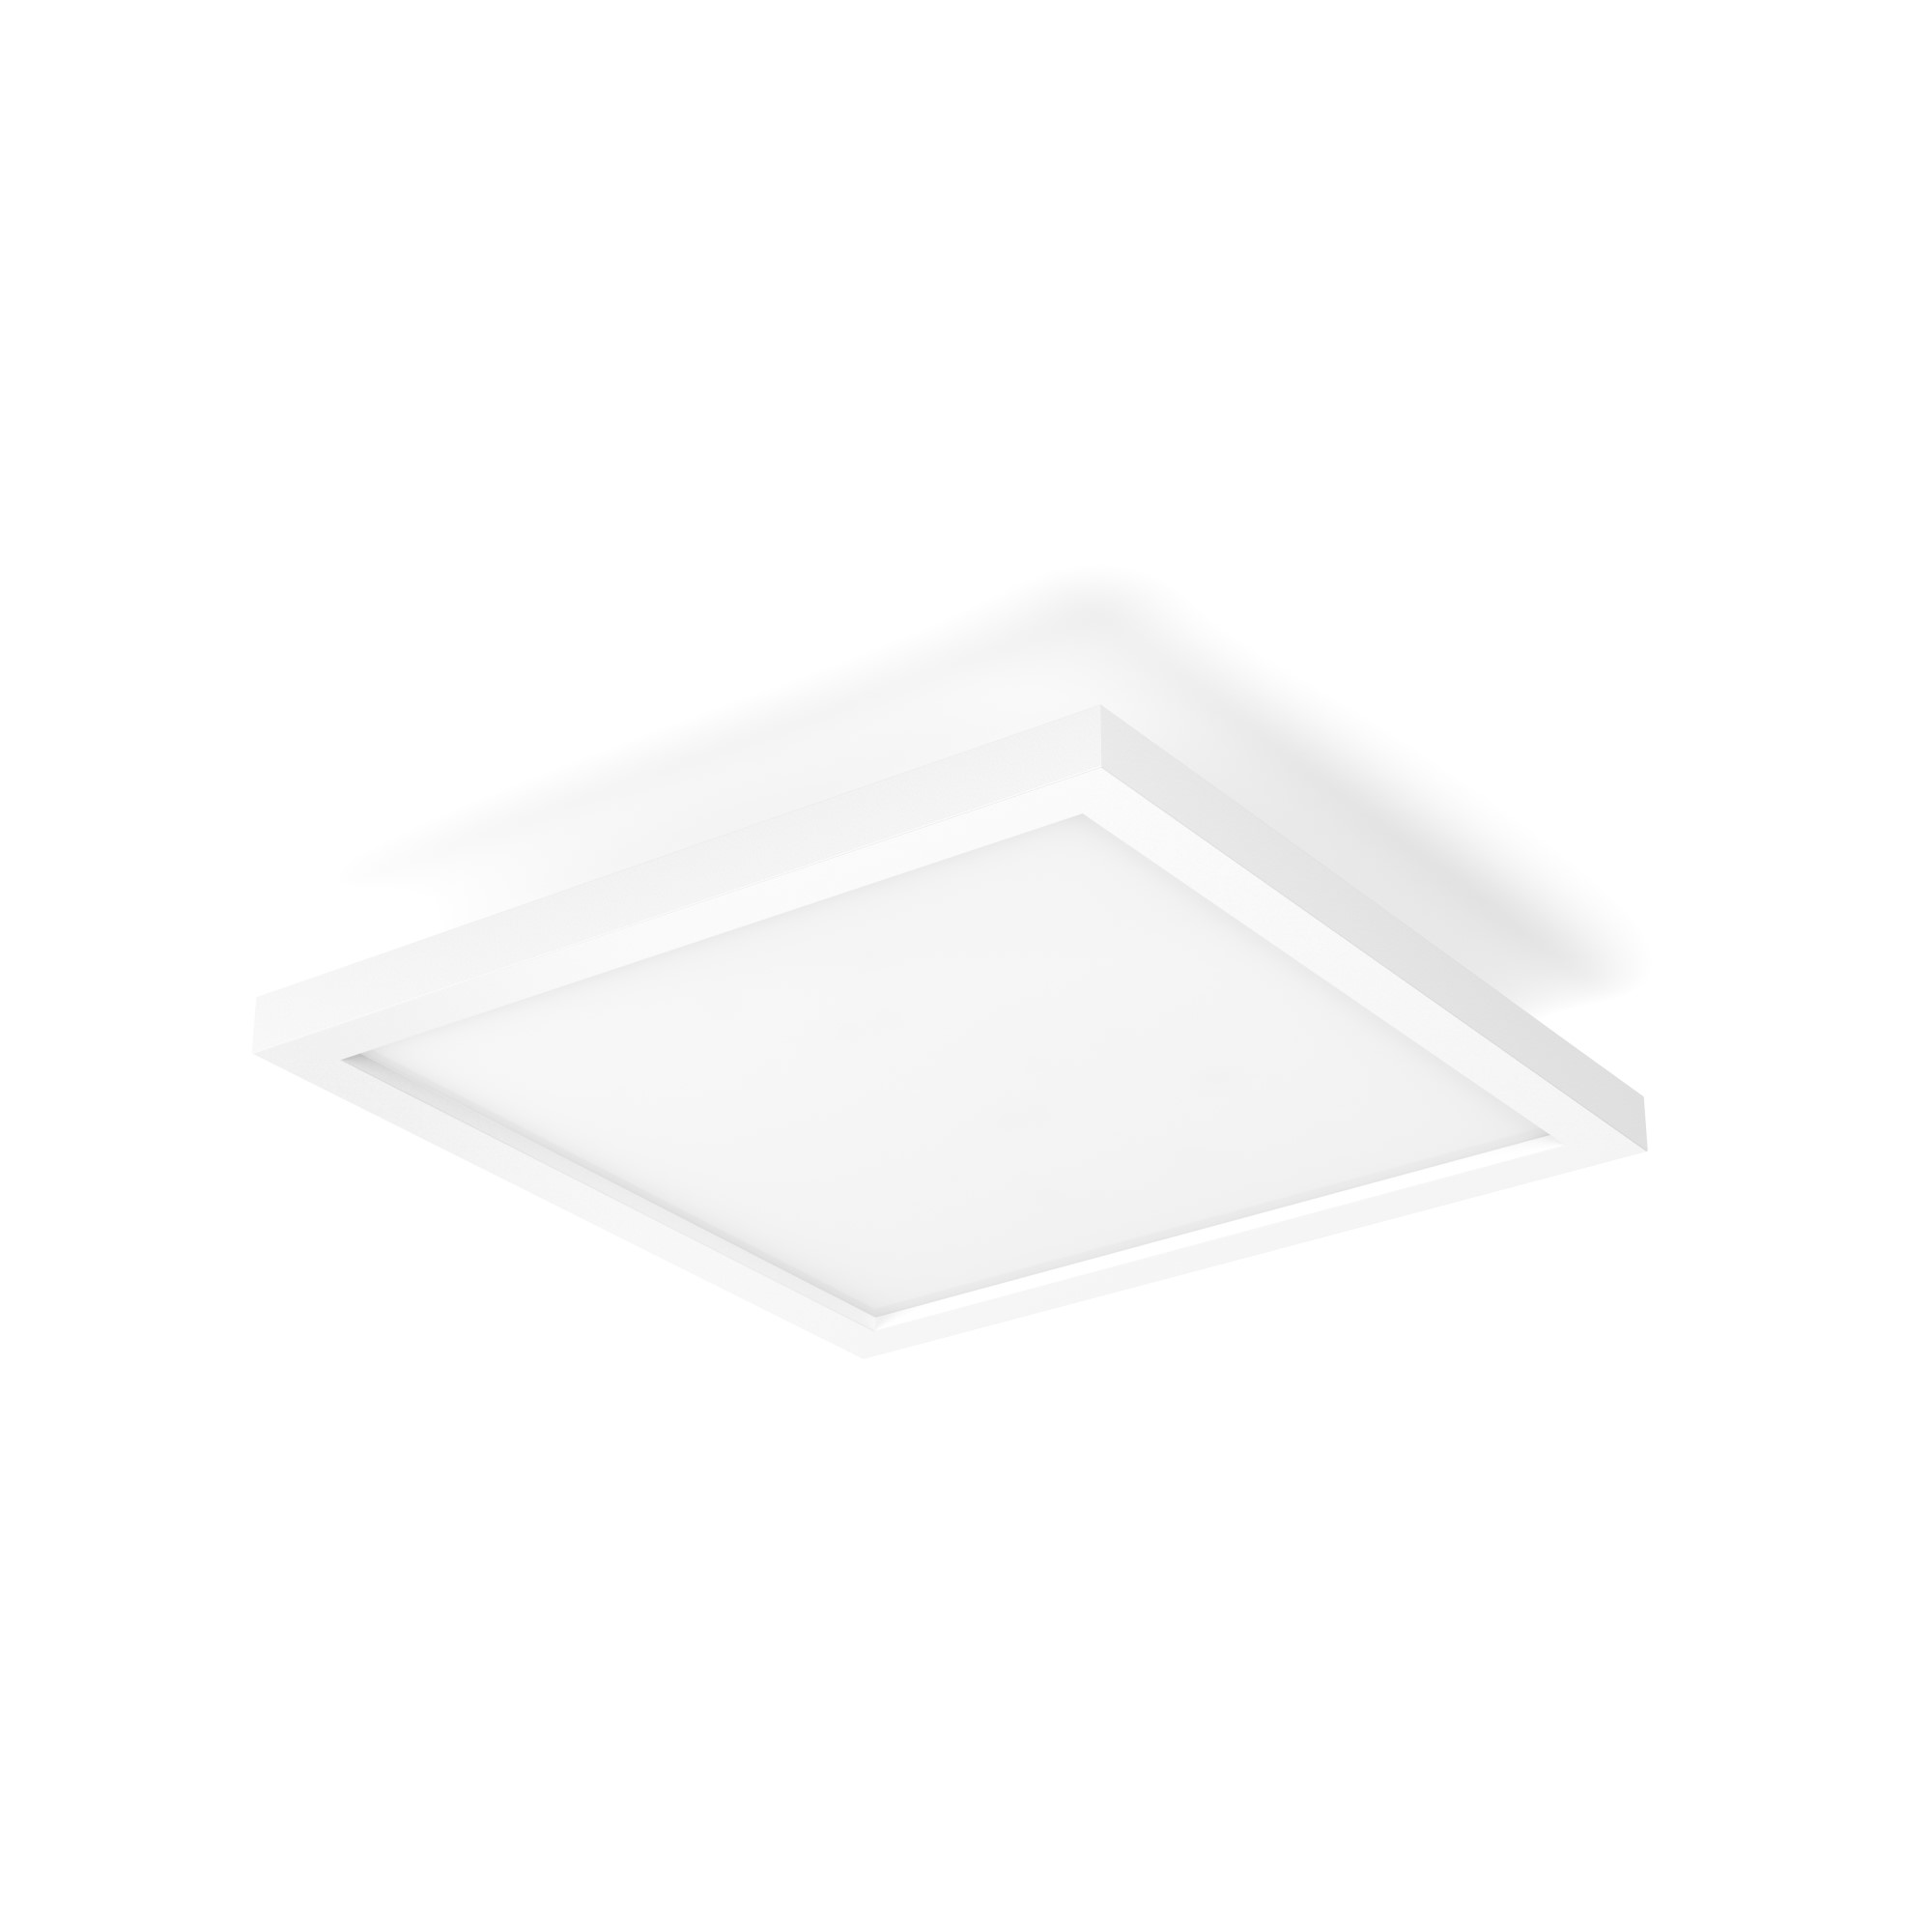 Philips Hue White Ambiance LED Panel Aurelle white 30x30cm incl. Dimmer Switch 1820lm